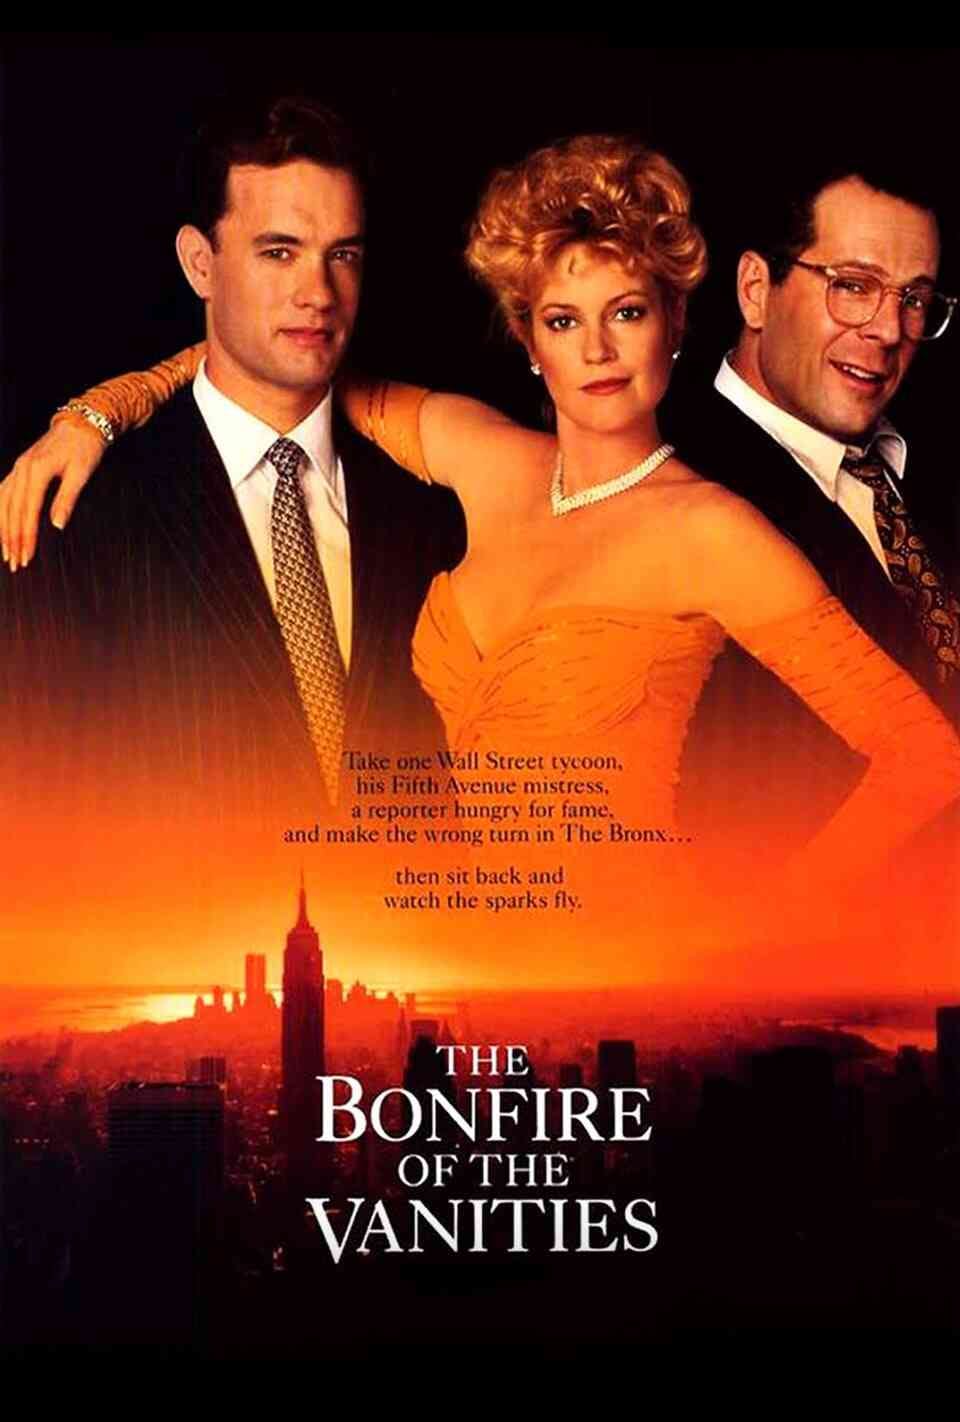 Read The Bonfire of the Vanities screenplay (poster)